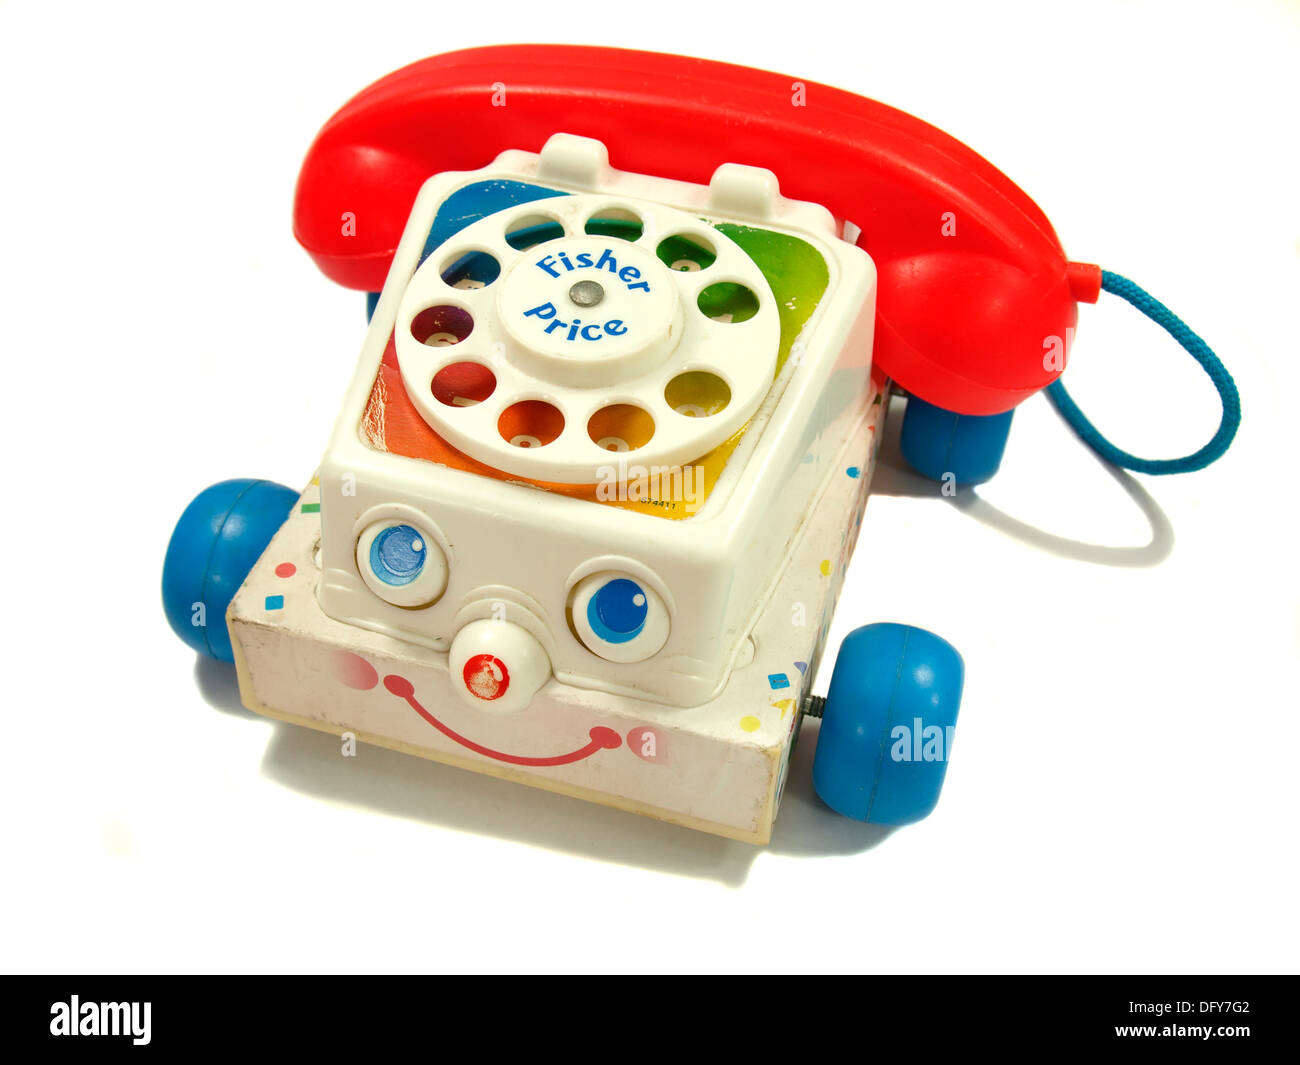 Buy the Fisher-Price Chatter Telephone, Classic Infant Pull Toy